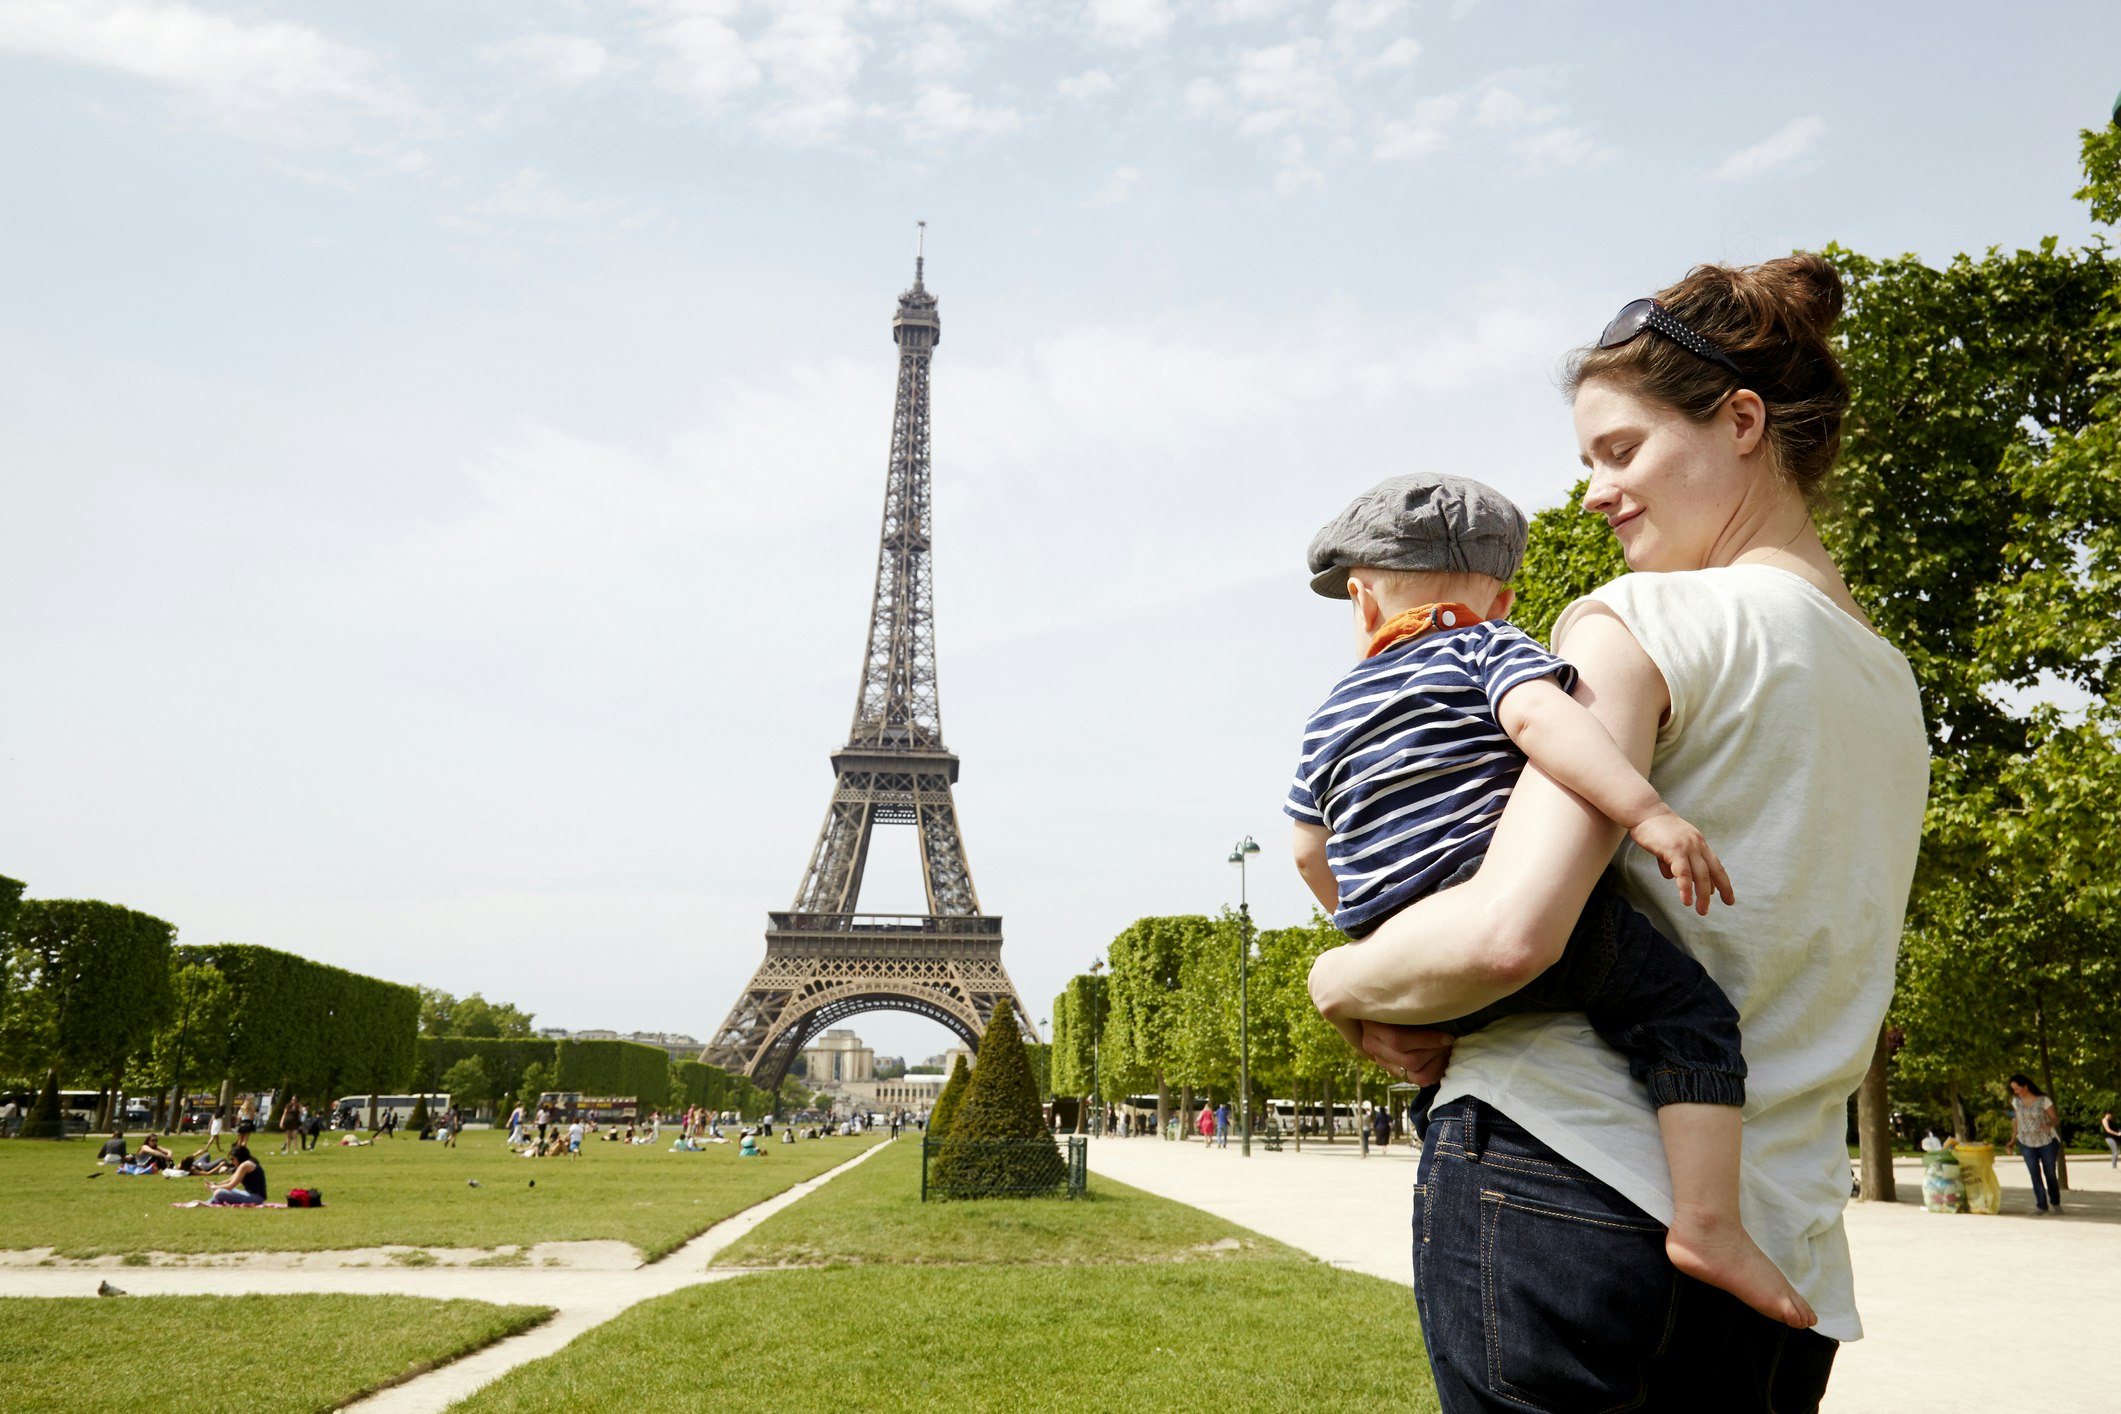 A mother holds a toddler on her hip as they stare at the Eiffel Tower together